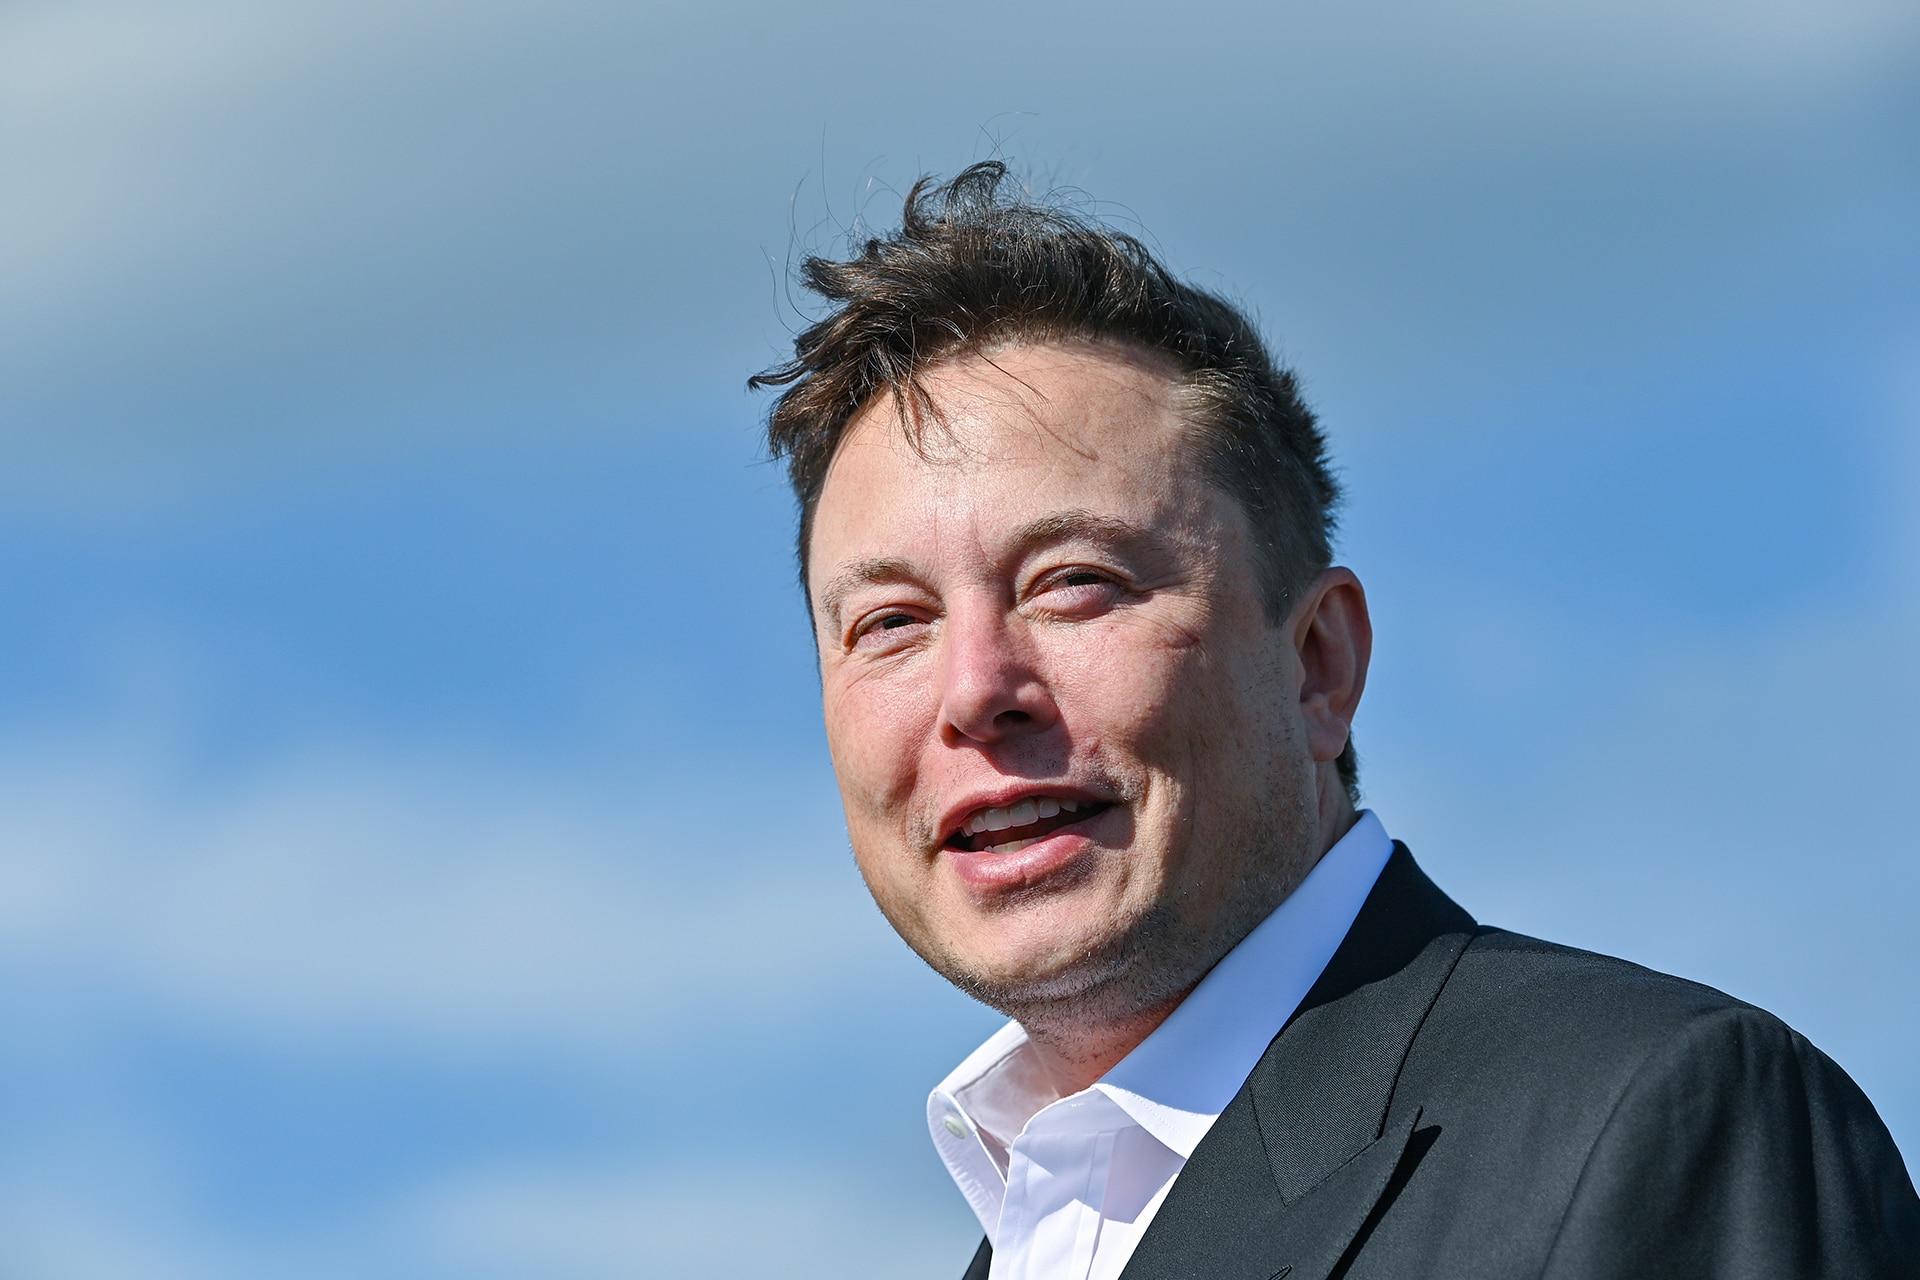 Elon Musk Just Became The World S Second Richest Person Gq elon musk just became the world s